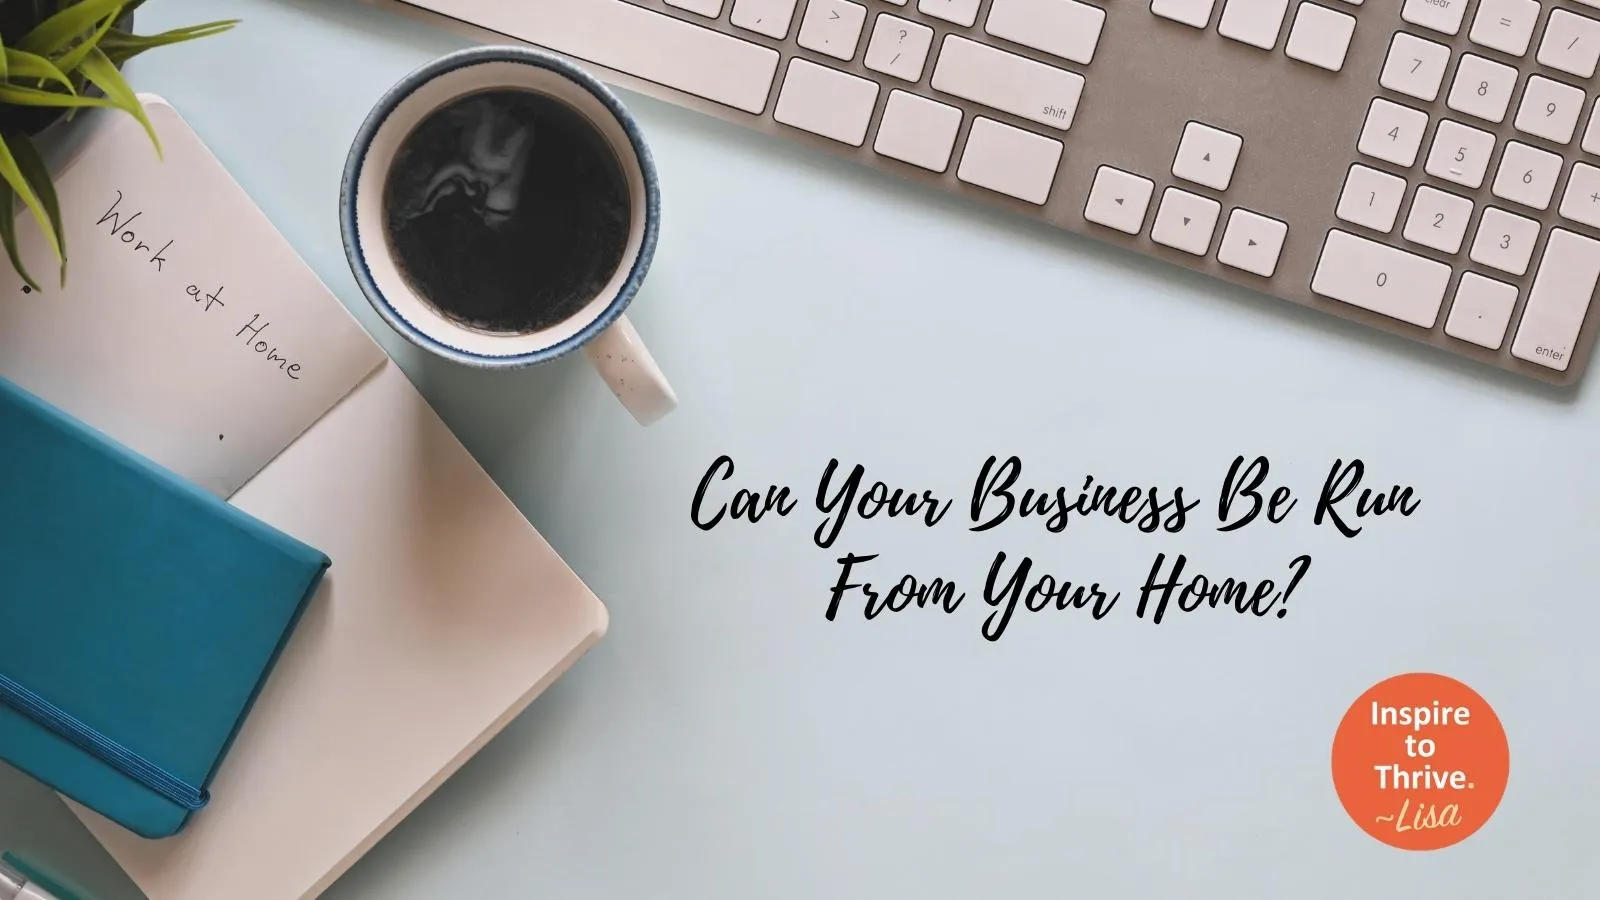 Can your business be run from your home?